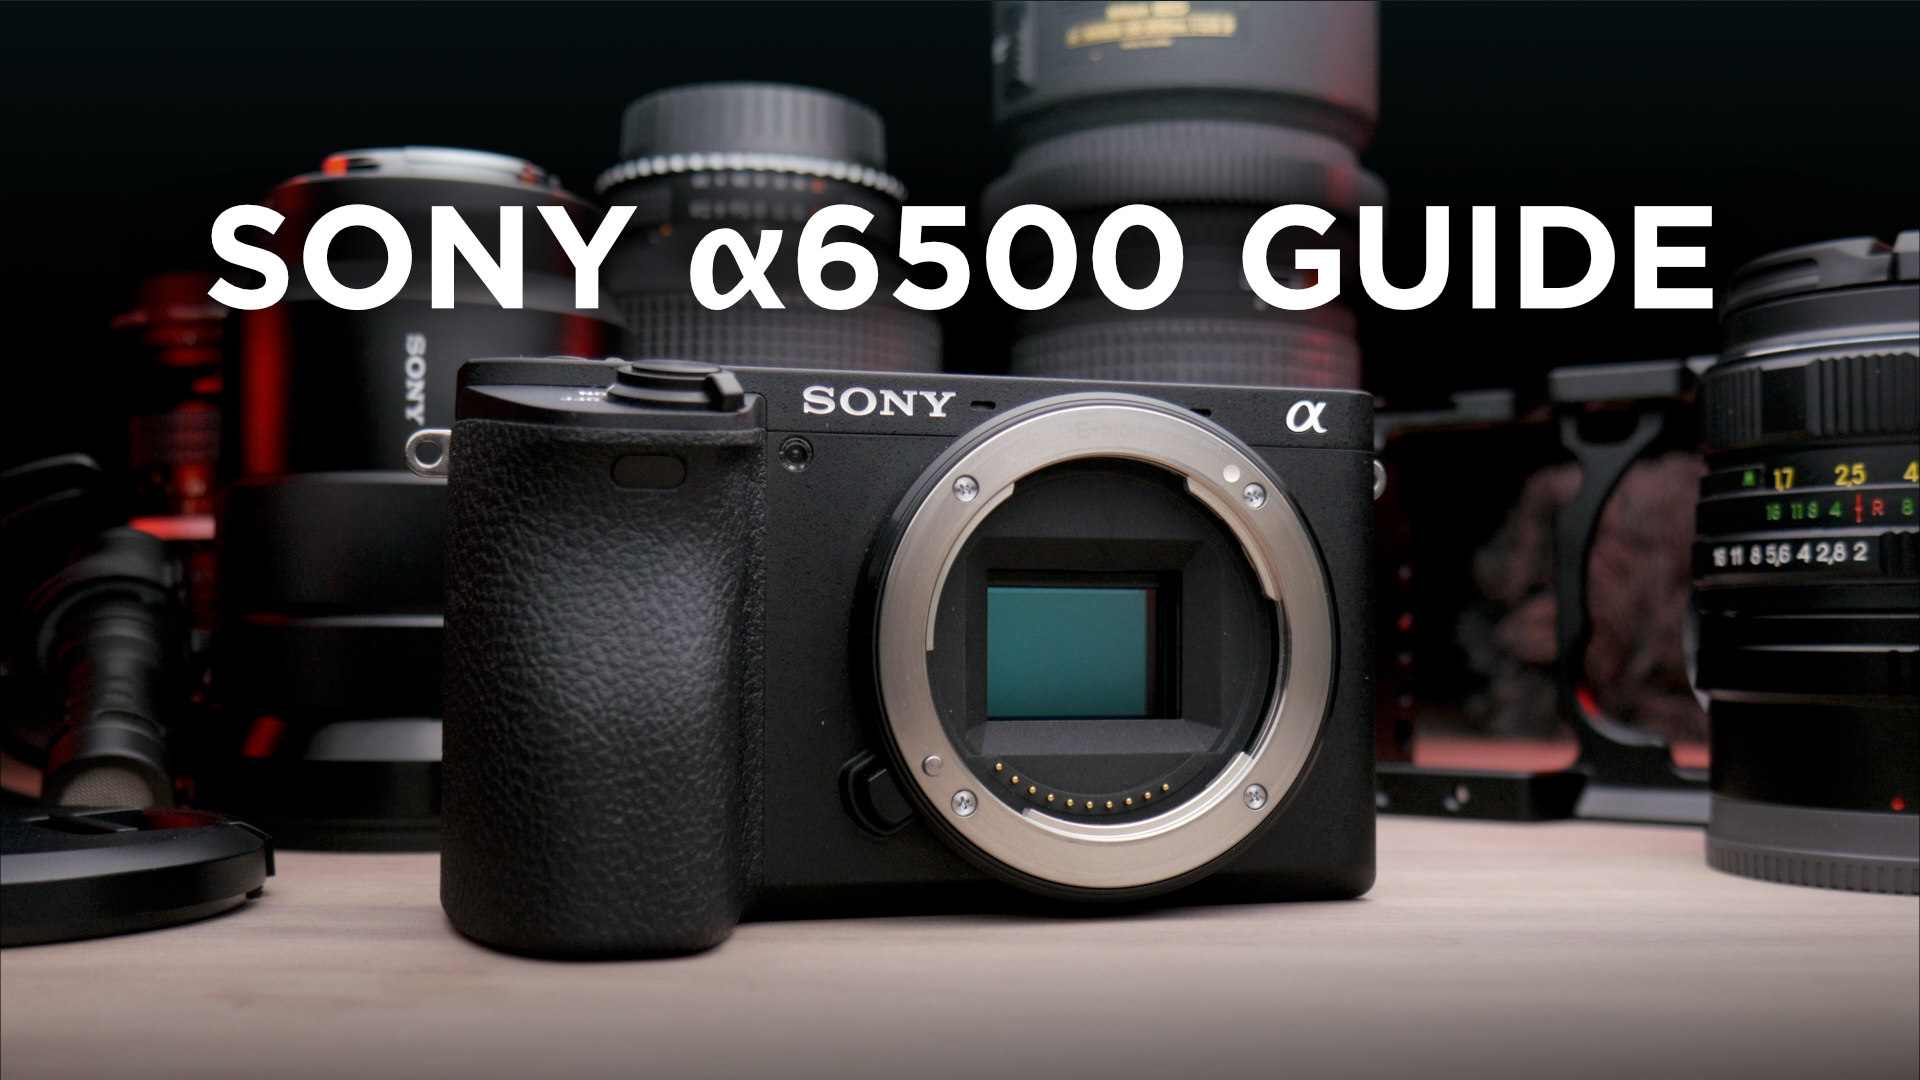 Sony a6500 Guide Now Available!